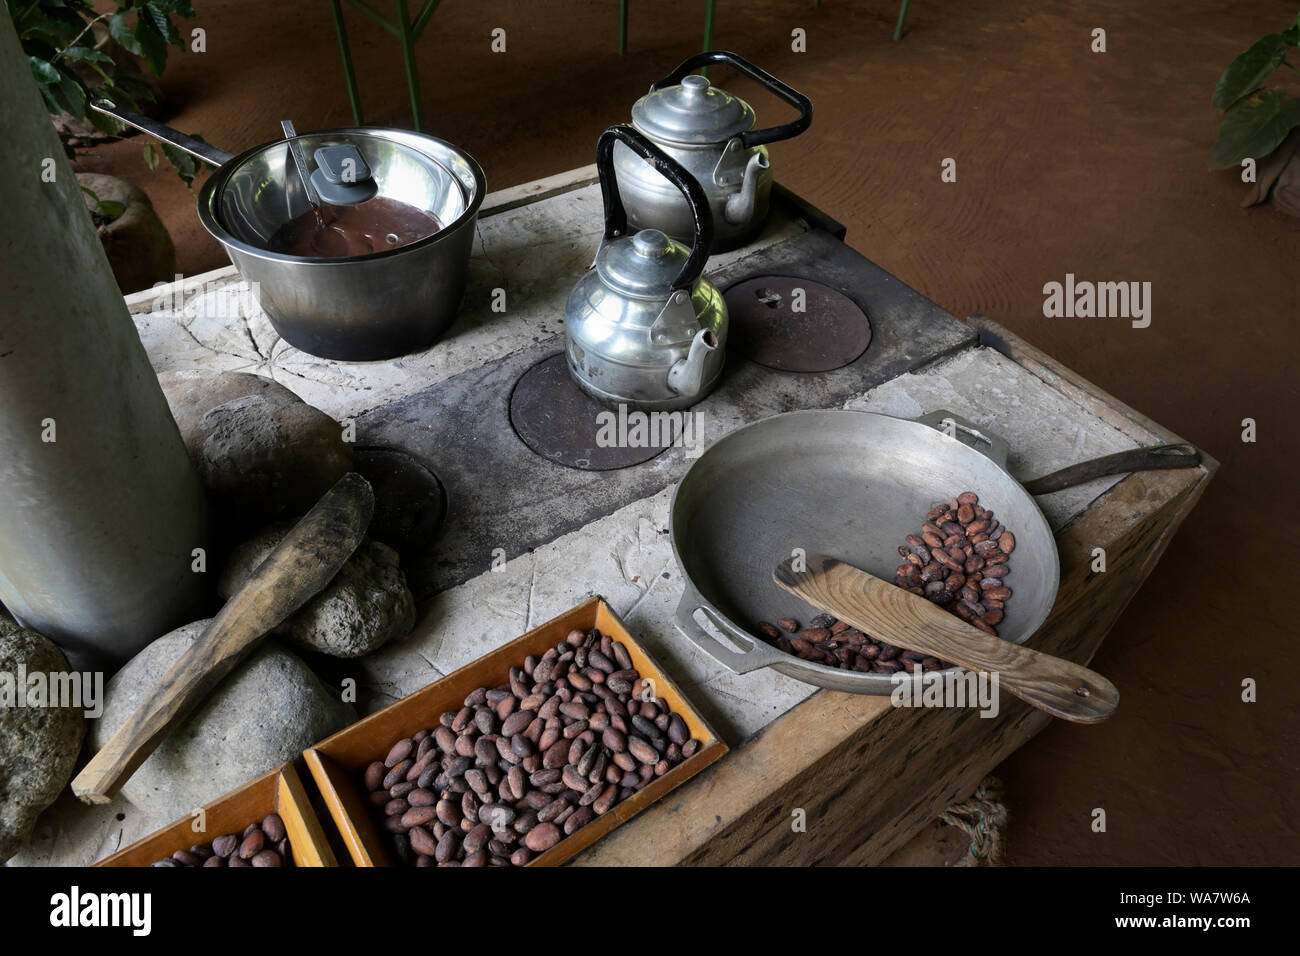 Roasting cacao seeds and making cocoa at a chocolate farm, Costa Rica Stock Photo